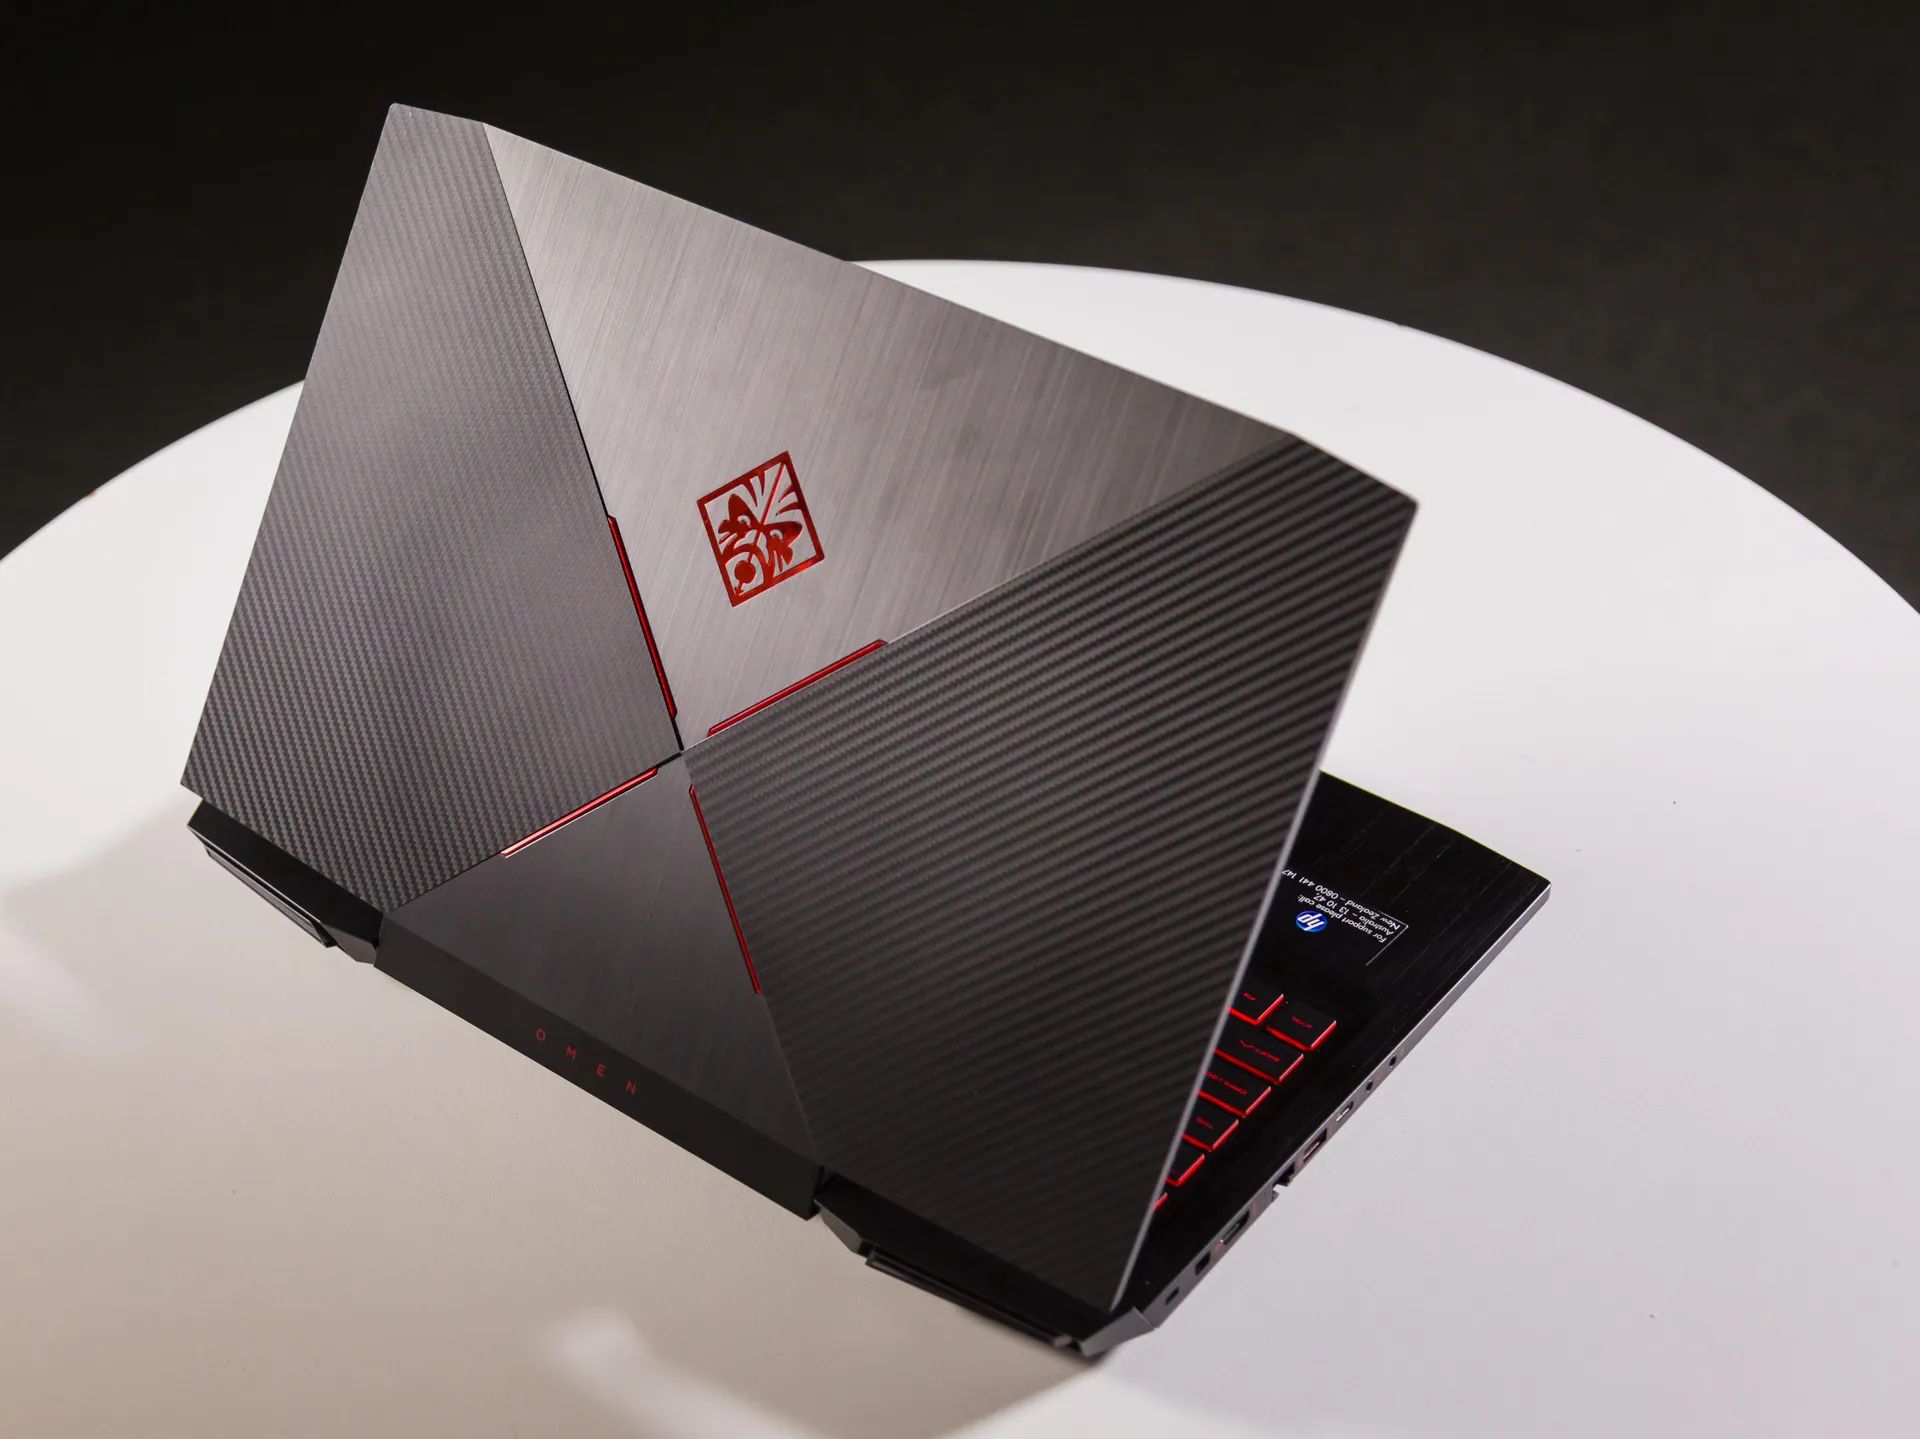 How To Remove Base From HP Omen Gaming Laptop